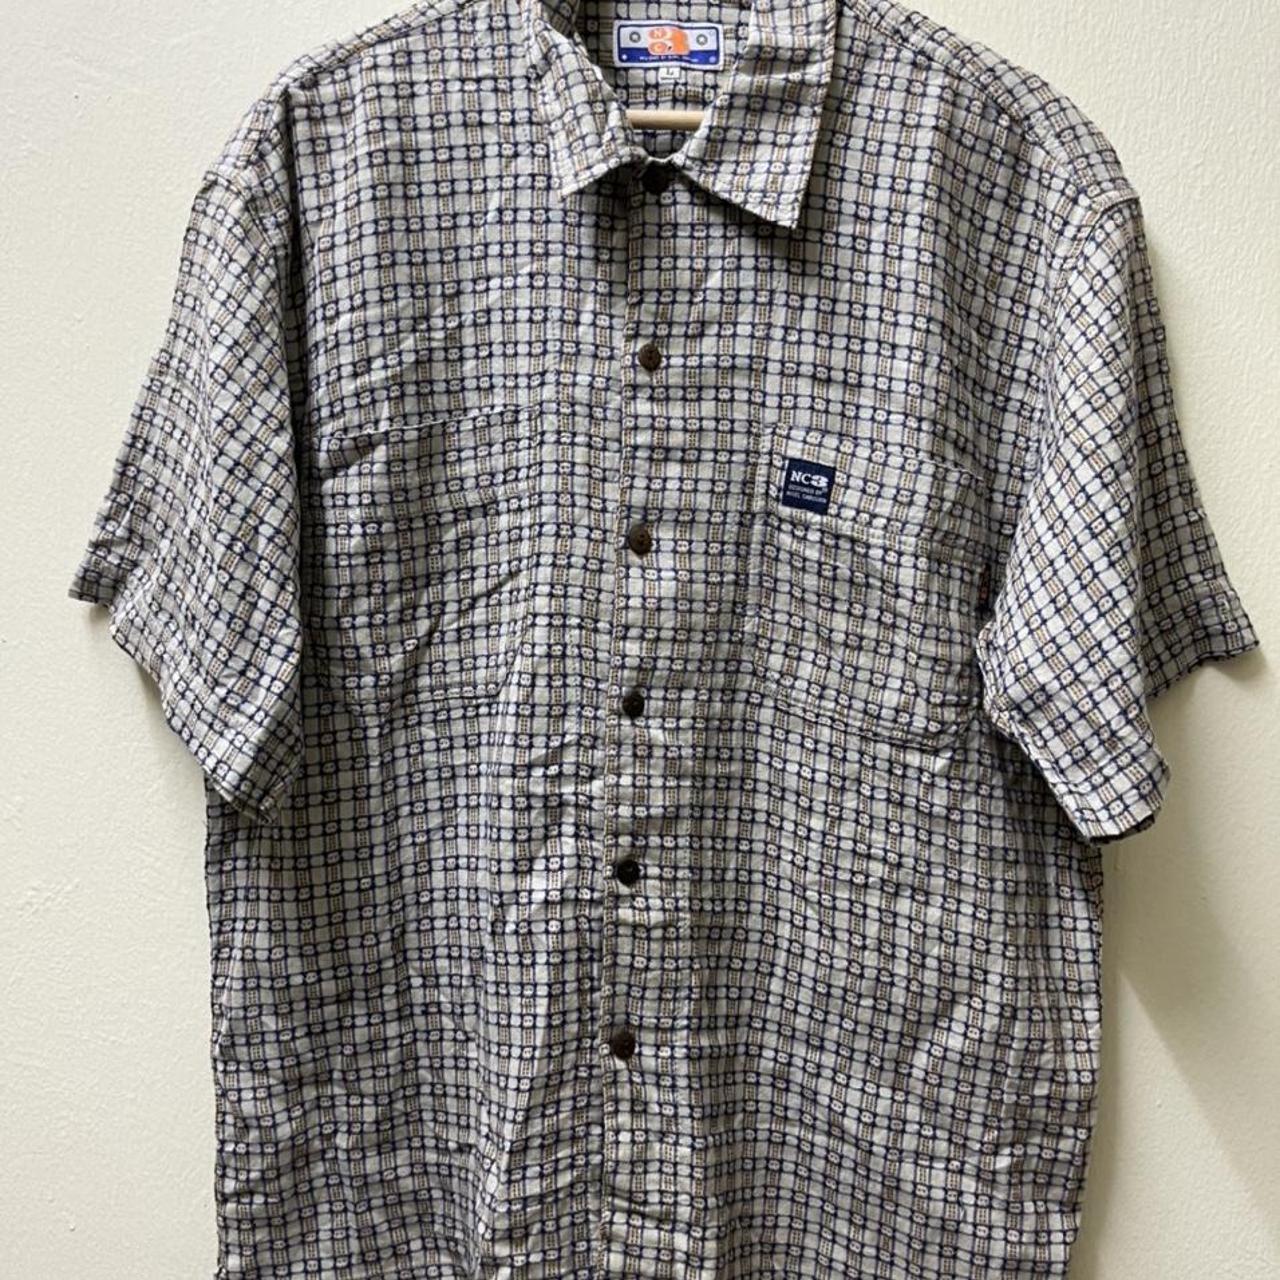 Product Image 1 - Vintage NC3 Nigel Cabourn Double